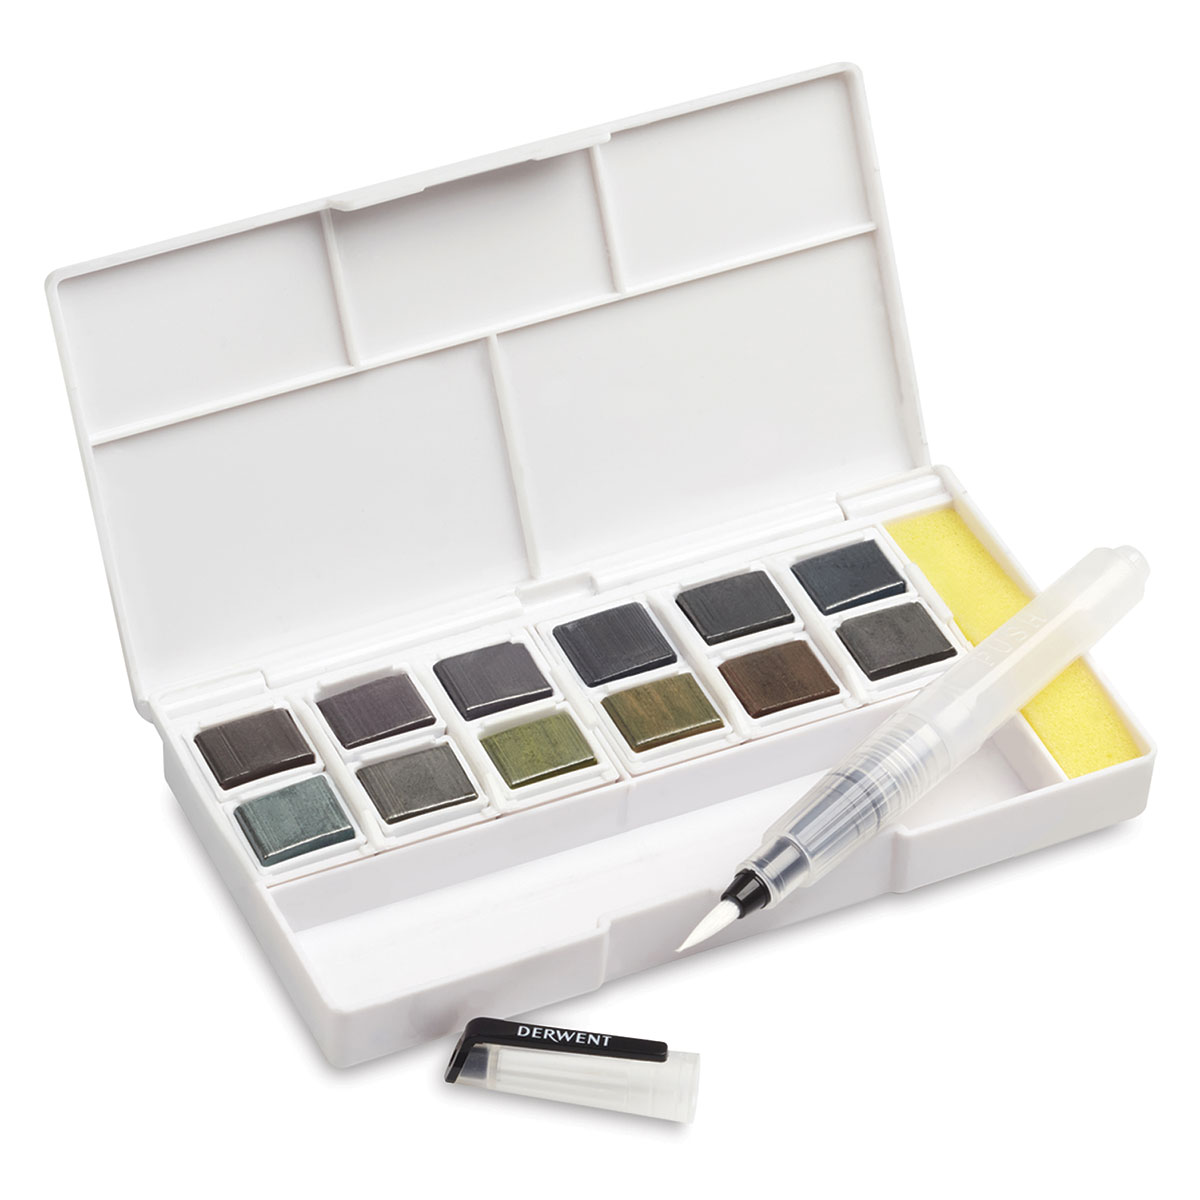 Graphitint Paint Pan Set by Derwent // Unboxing & Swatching